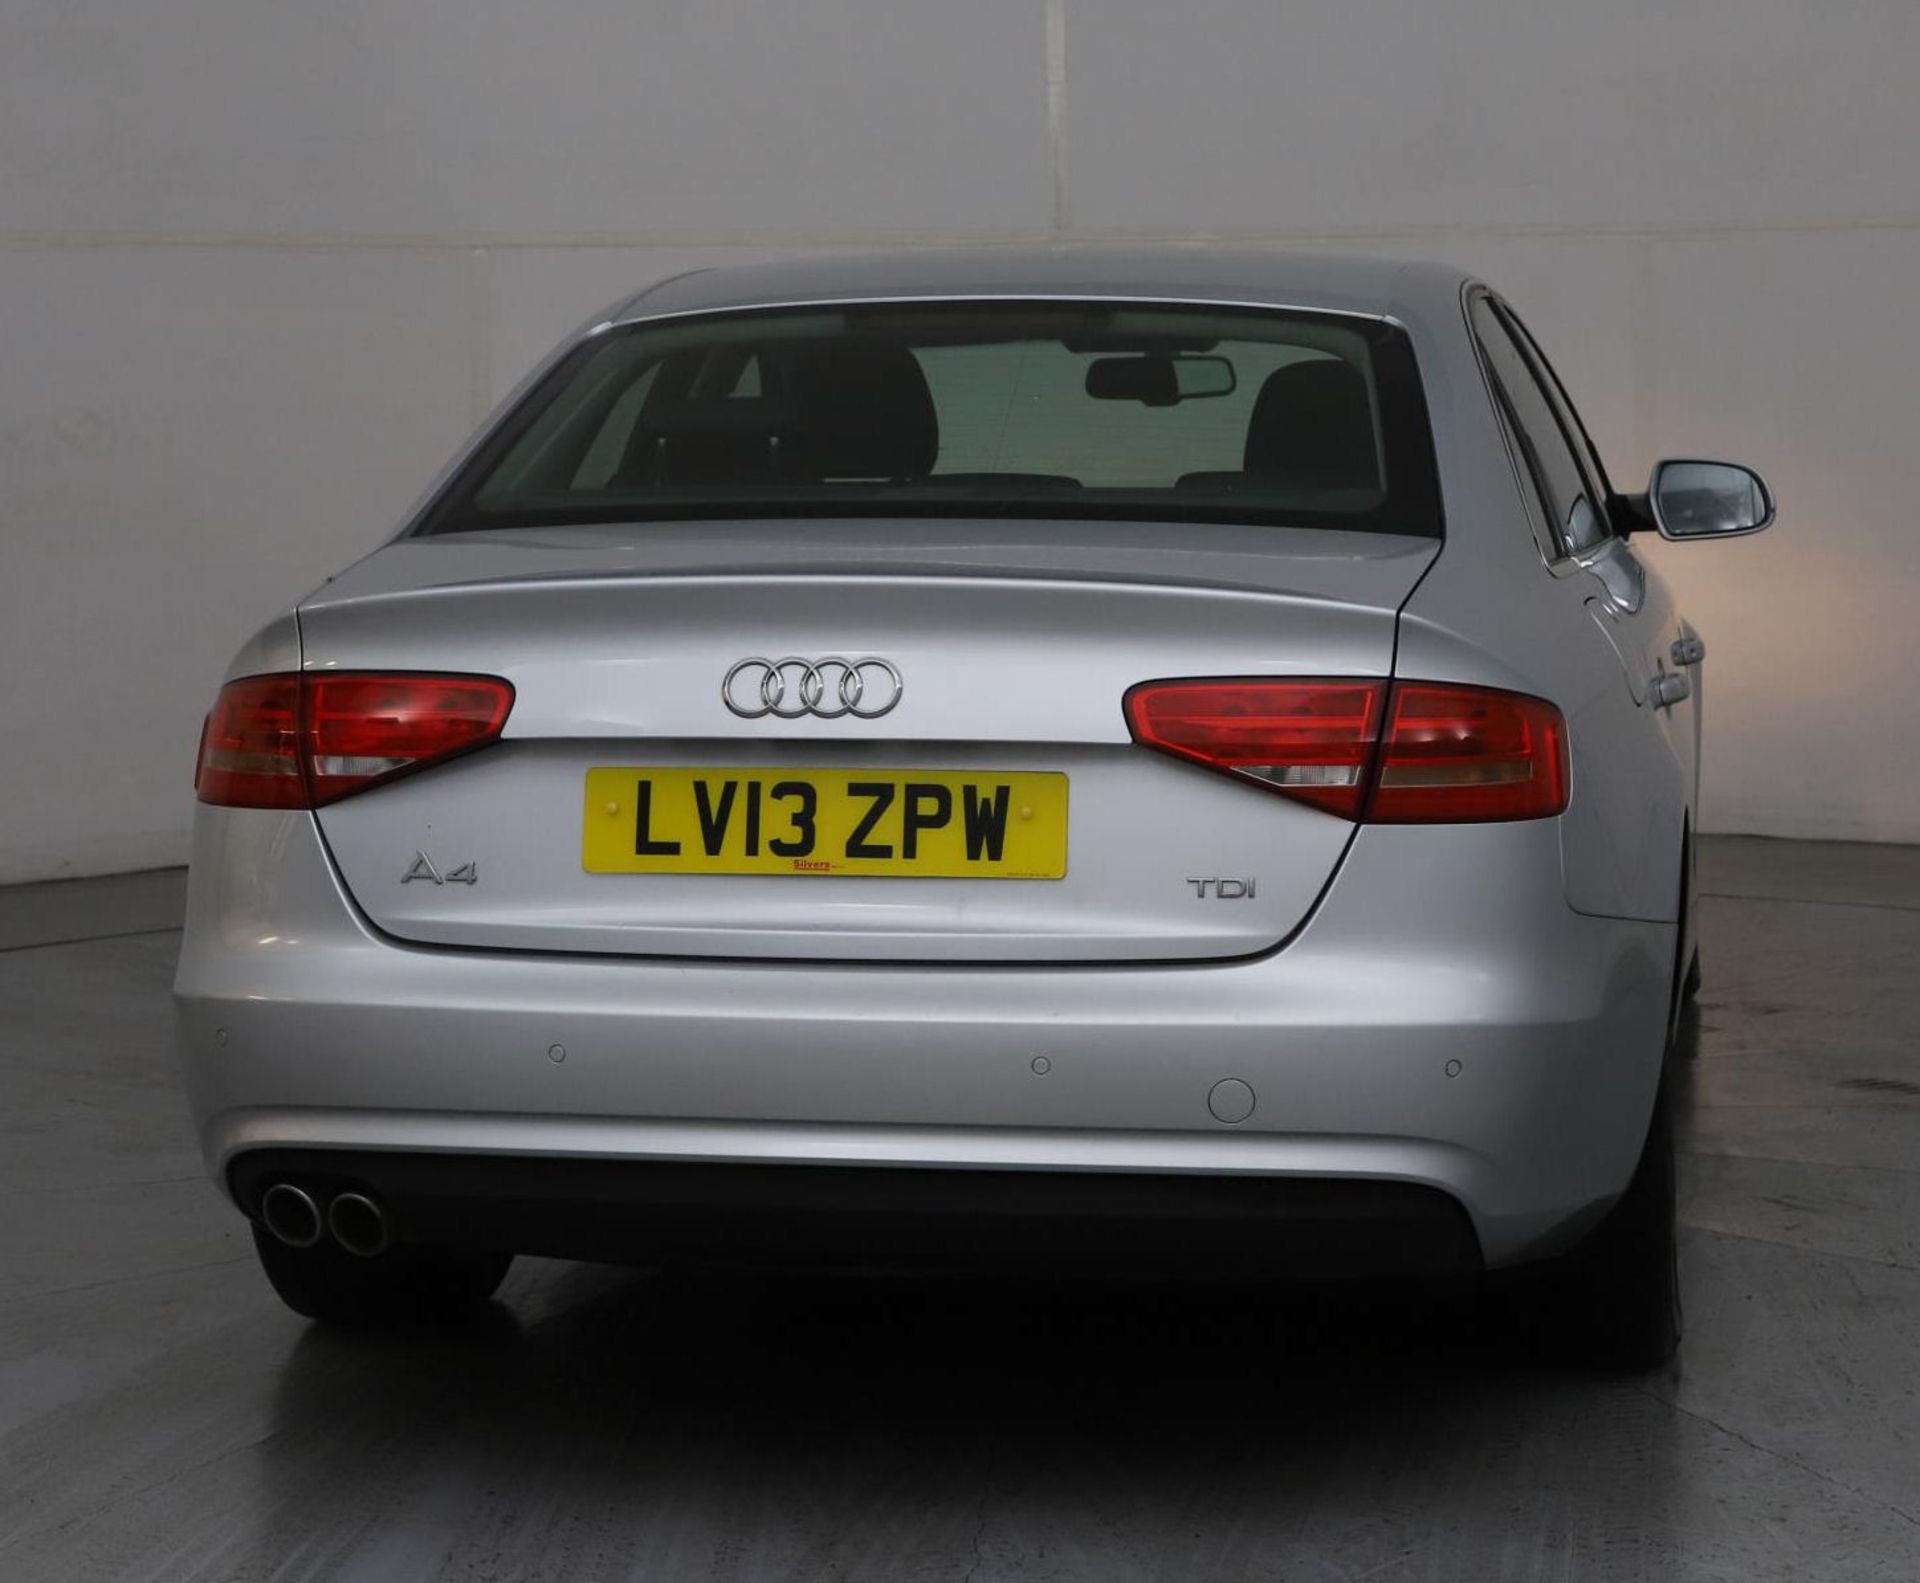 2013 Audi A4 2.0 Tdi SE 4 Door Saloon - CL505 - NO VAT ON THE HAMMER - Location: Corby - Image 2 of 12